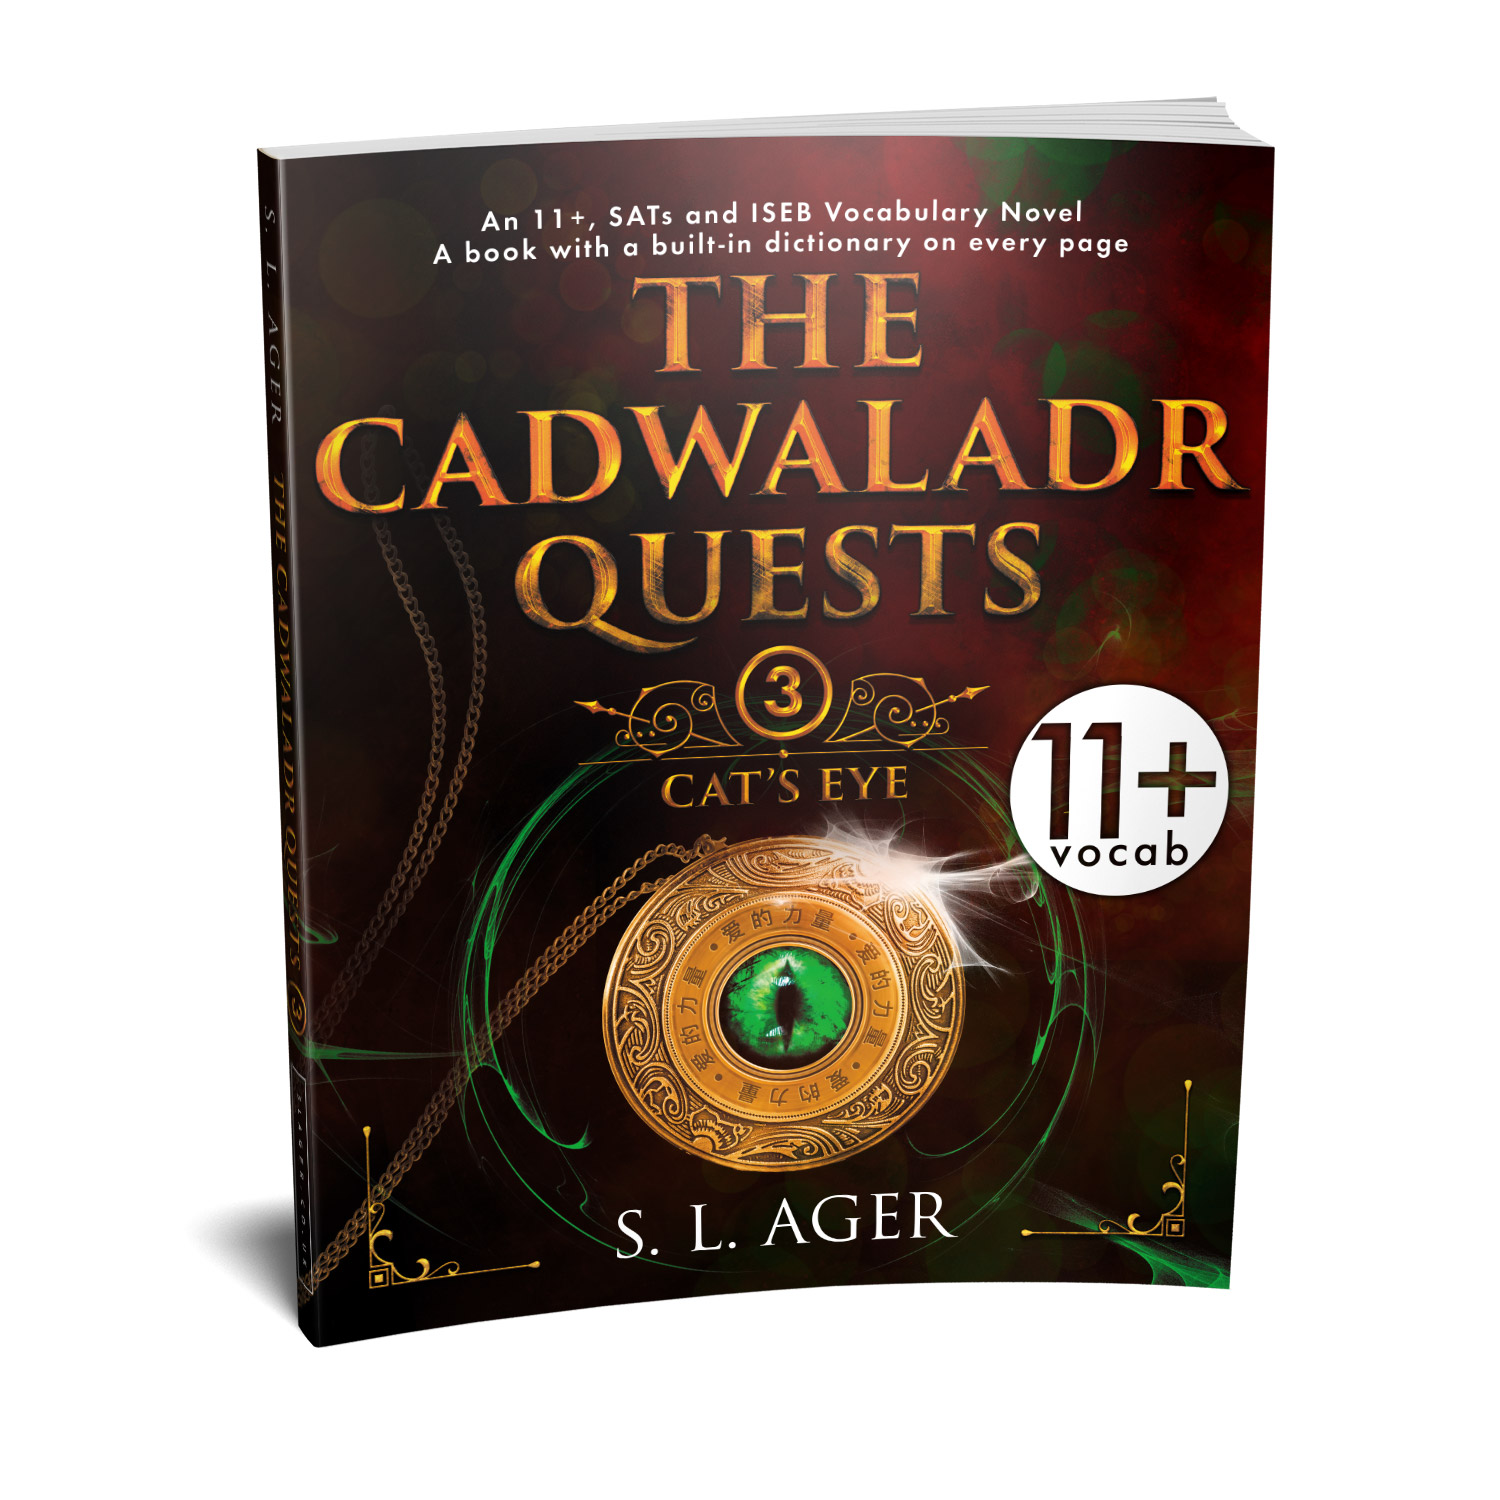 'The Cadwaladr Quests' is unique, story-based, educational tool that teaches young readers nearly 3000 exam-level English words. The author is S L Ager. The book cover and interior design are by Mark Thomas. To learn more about what Mark could do for your book, please visit coverness.com.